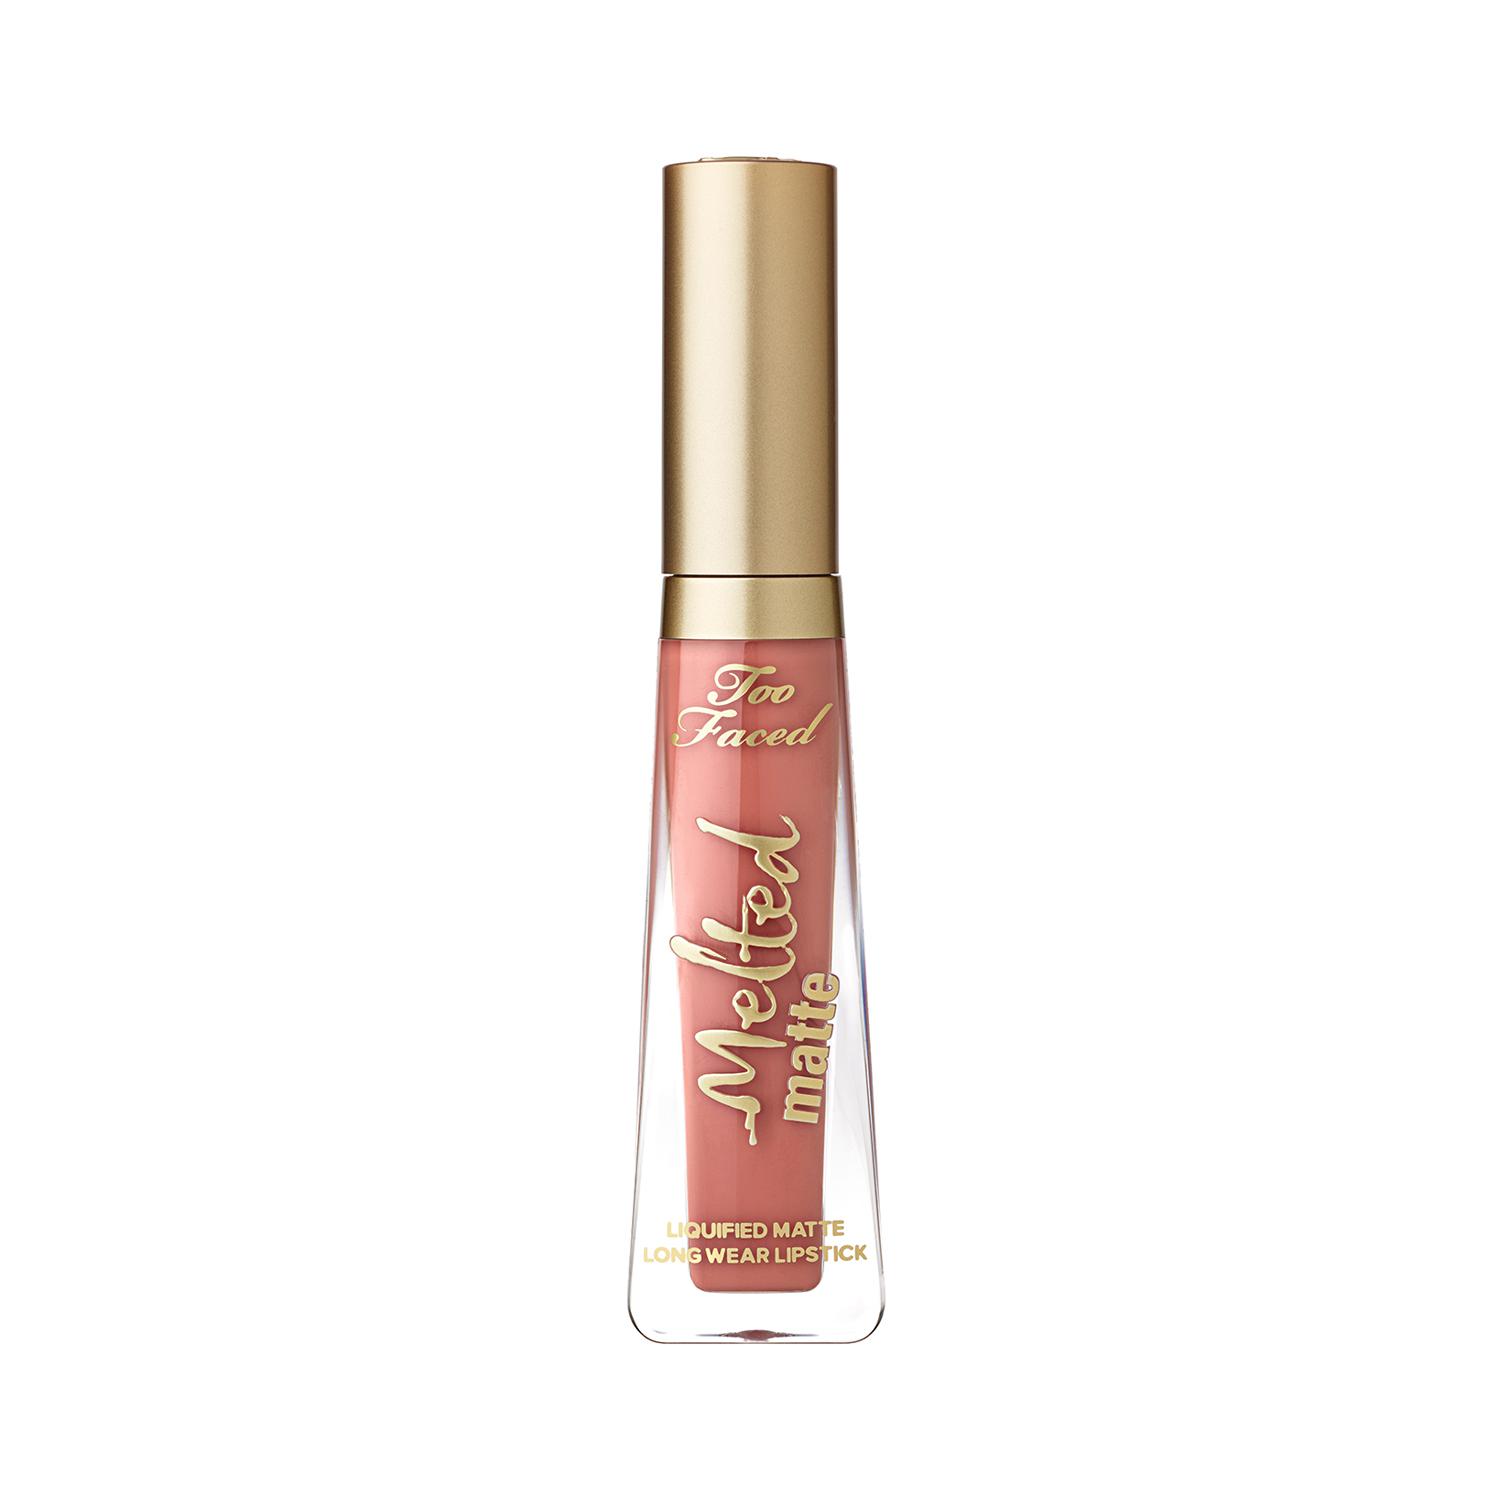 Too Faced | Too Faced Melted Matte Liquid Lipstick - Social Fatigue (7ml)